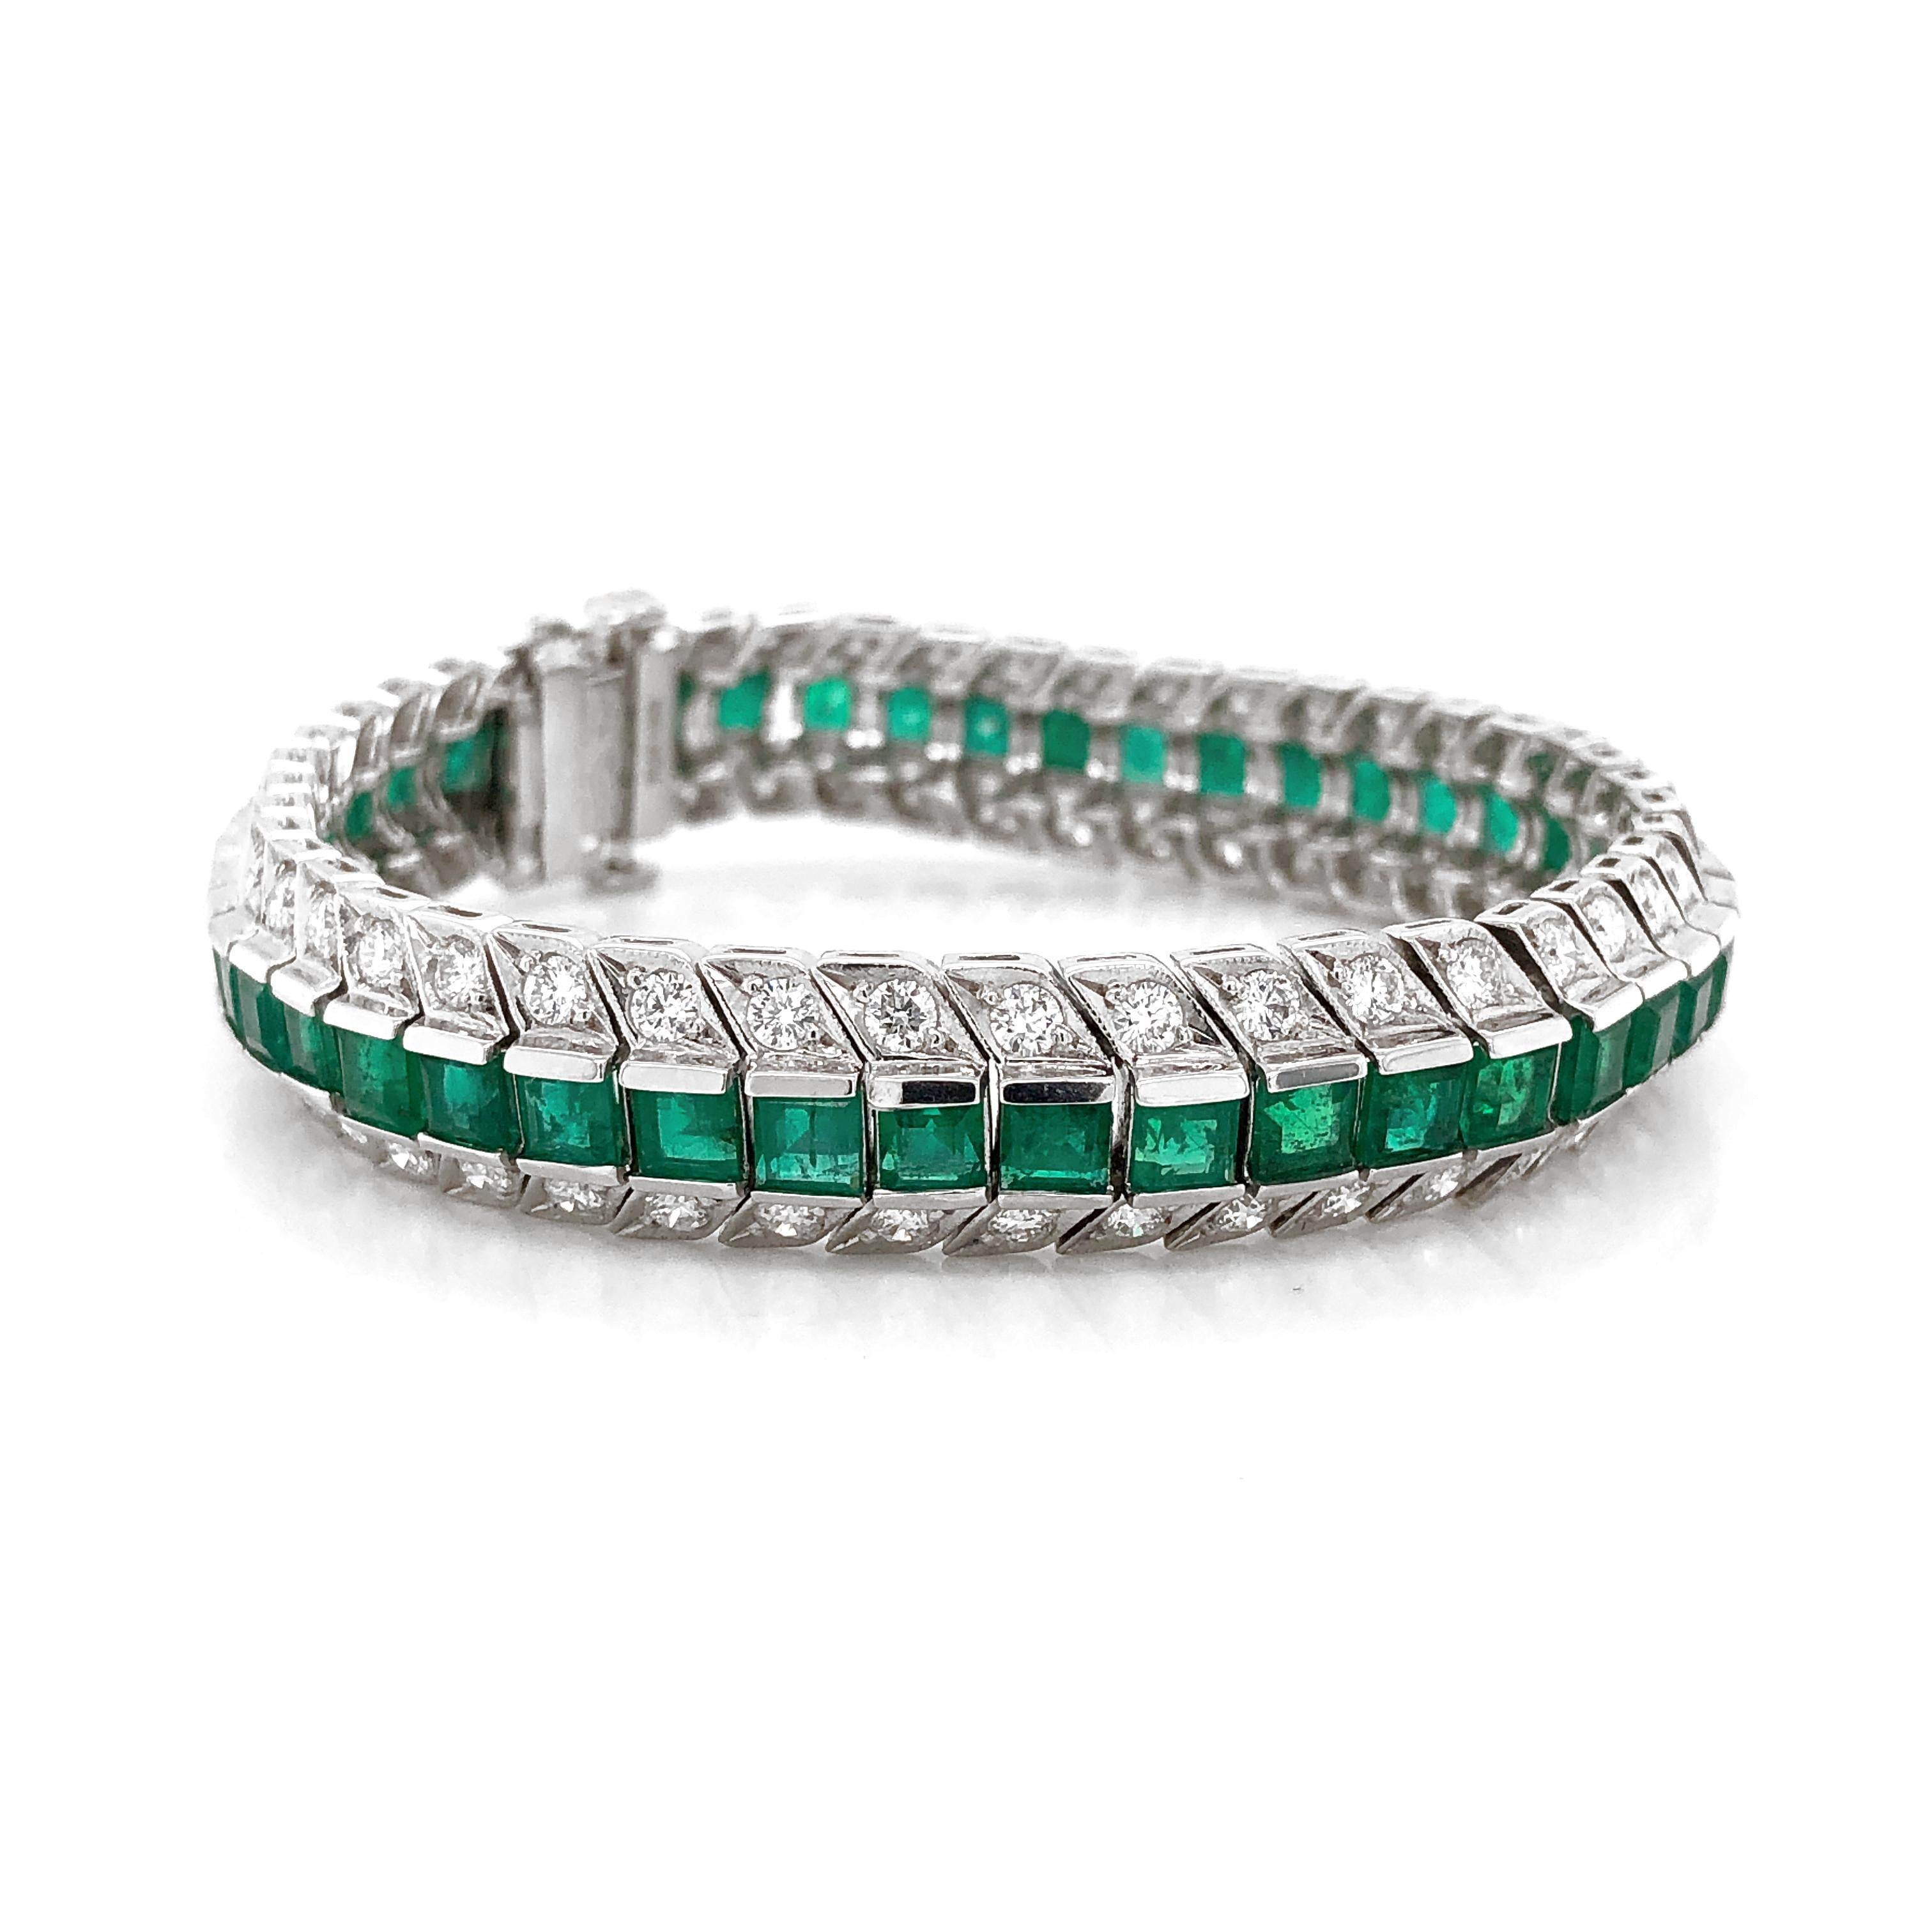 Zambian Square Cut Emeralds 14.28 Carat Diamond Platinum Link Bracelet In New Condition For Sale In New York, NY